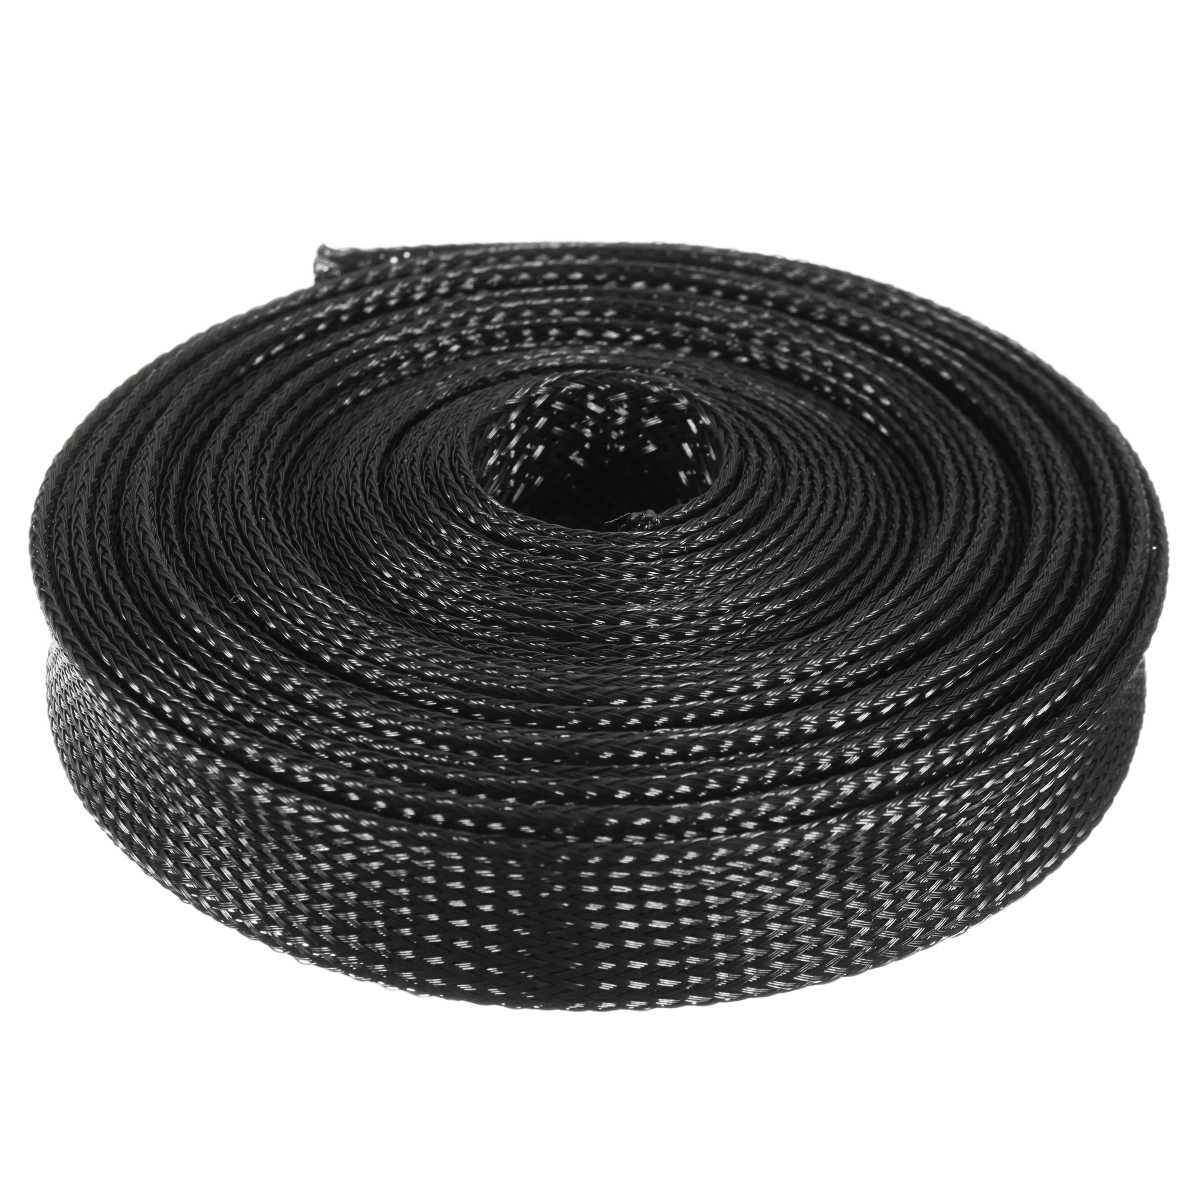 6m-8mm10mm12mm15mm20mm-Wire-Cable-Sheathing-Expandable-Sleeving-Braided-Loom-Tubing-Black-1179628-7